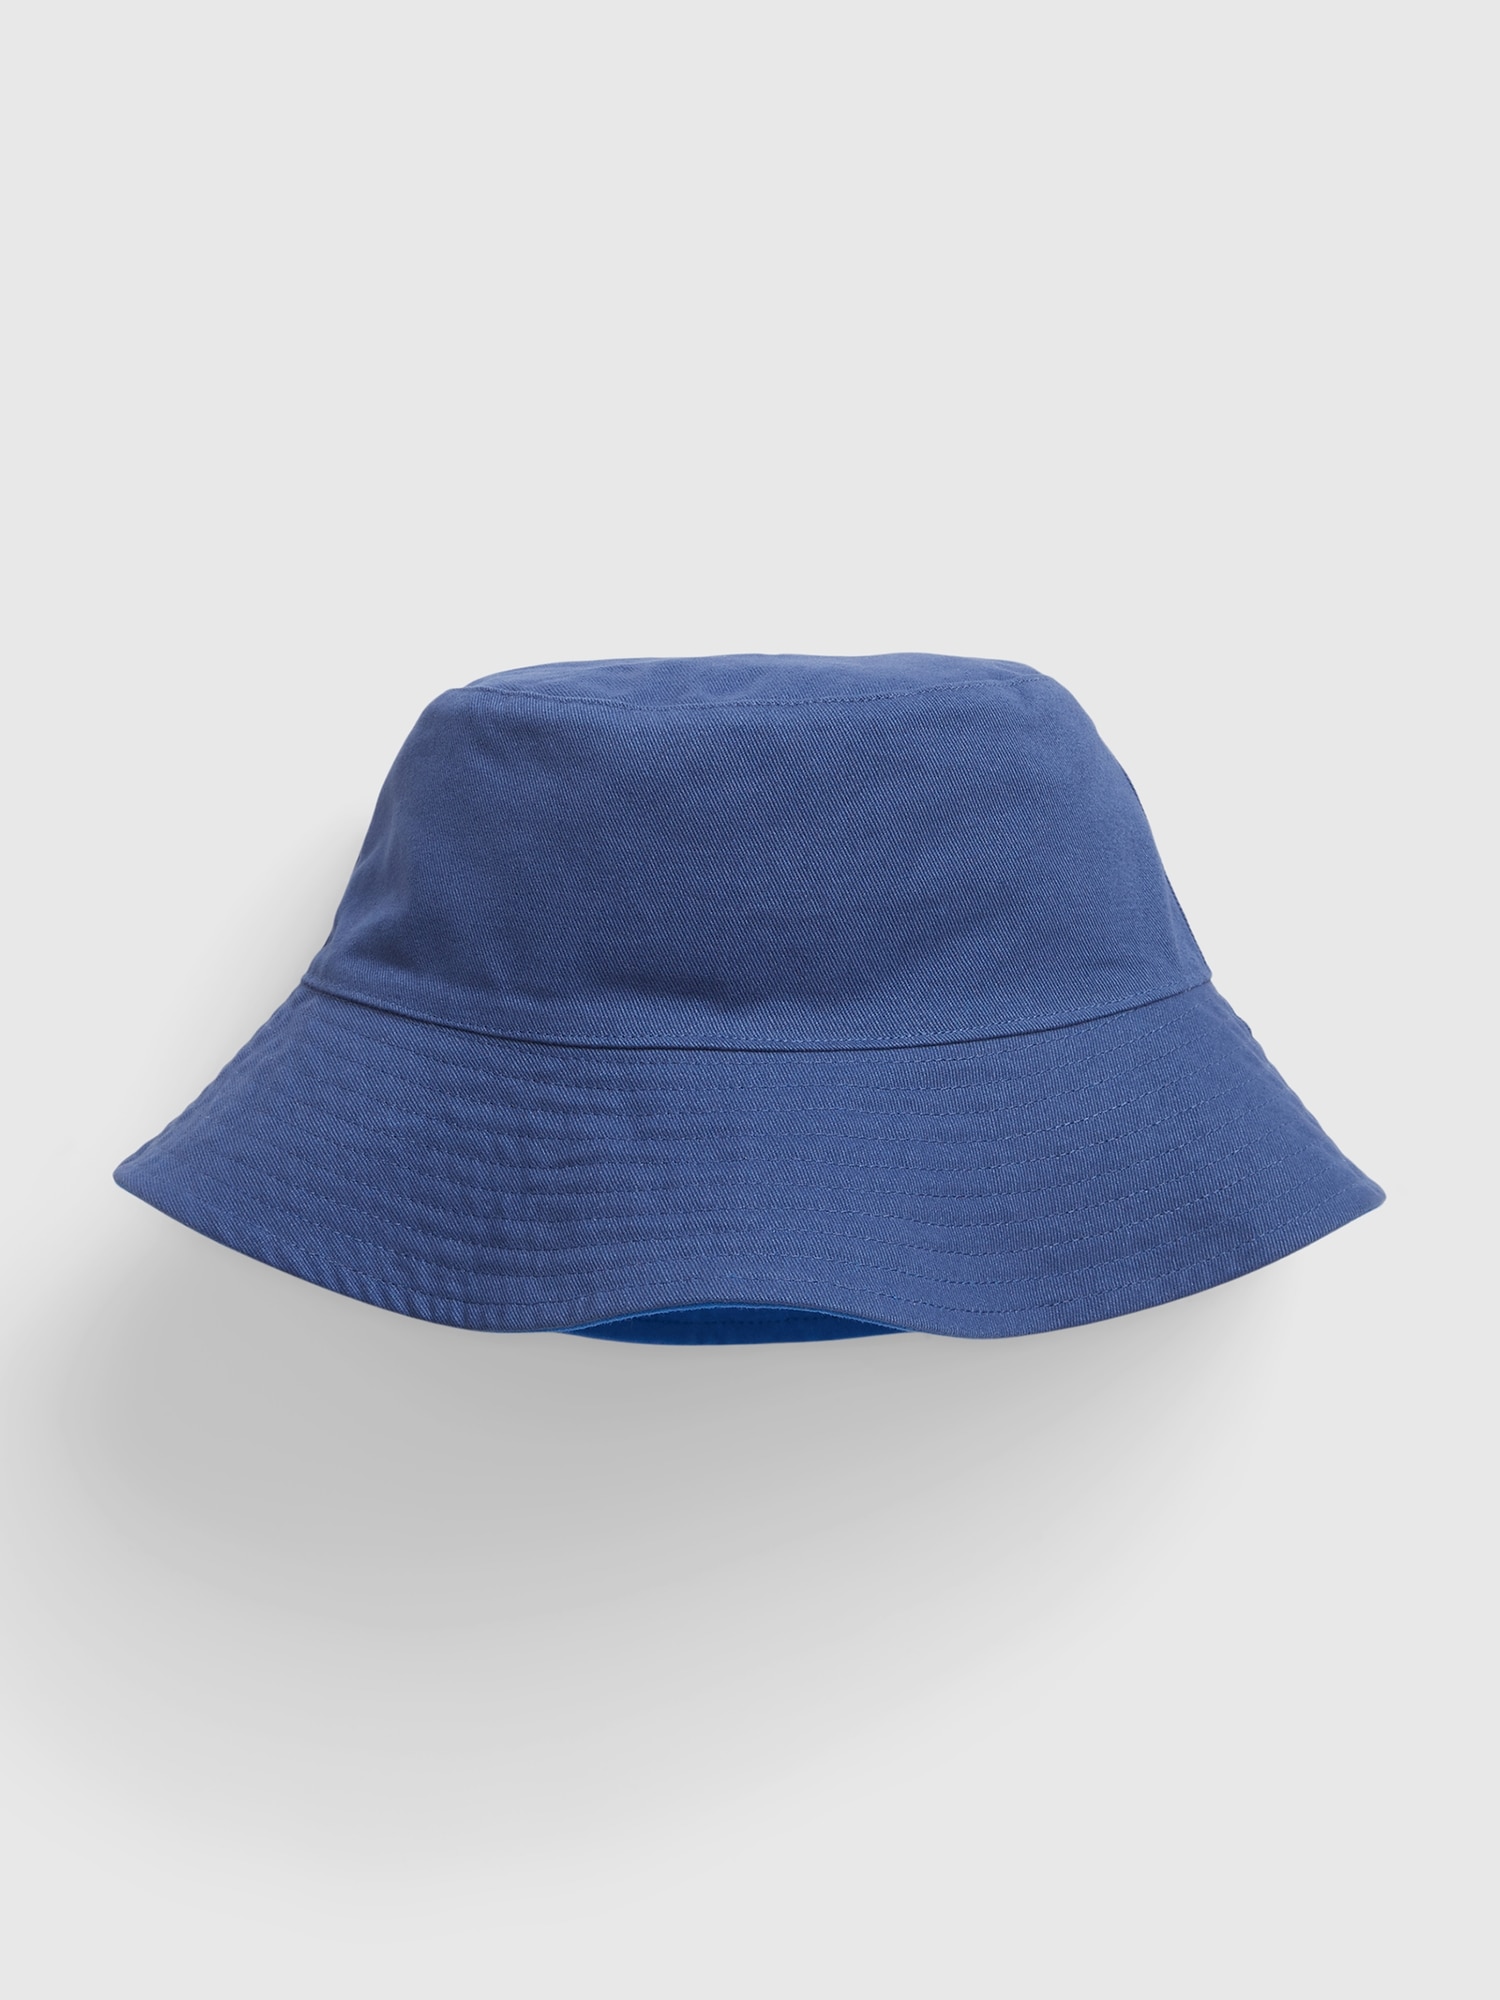 Organic Reversible Bucket Sun Hat - Otters – Natural Resources